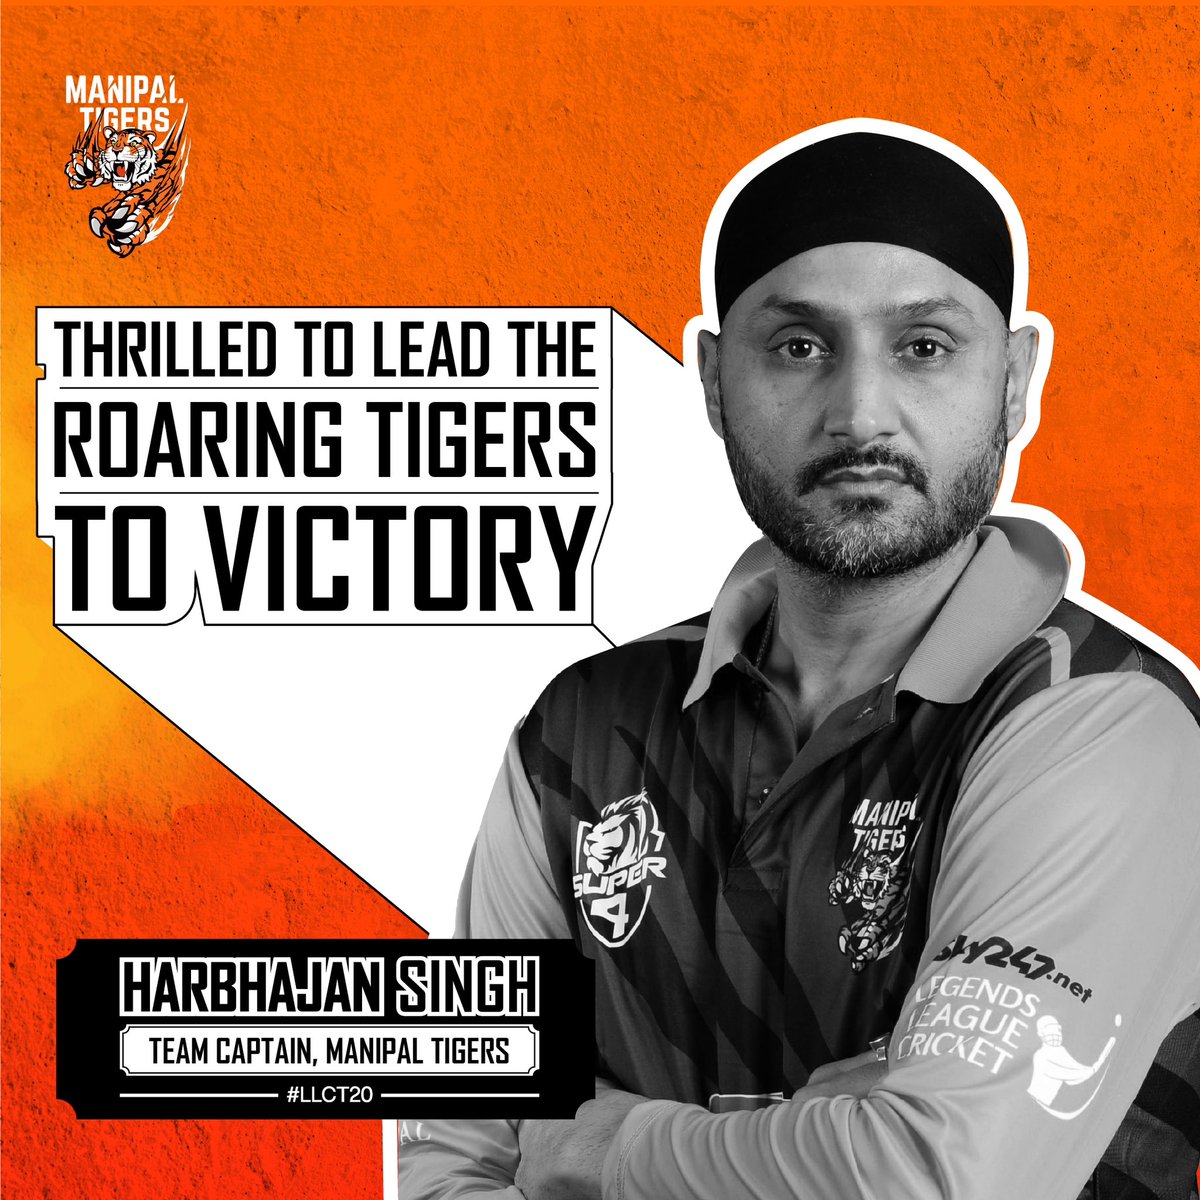 Ready to lead the Manipal Tigers once again this season at #LLCT20!
@manipal_tigers @llct20

#ManipalTigers #CricketFever #BossLogonKaGame #LegendsLeagueCricket